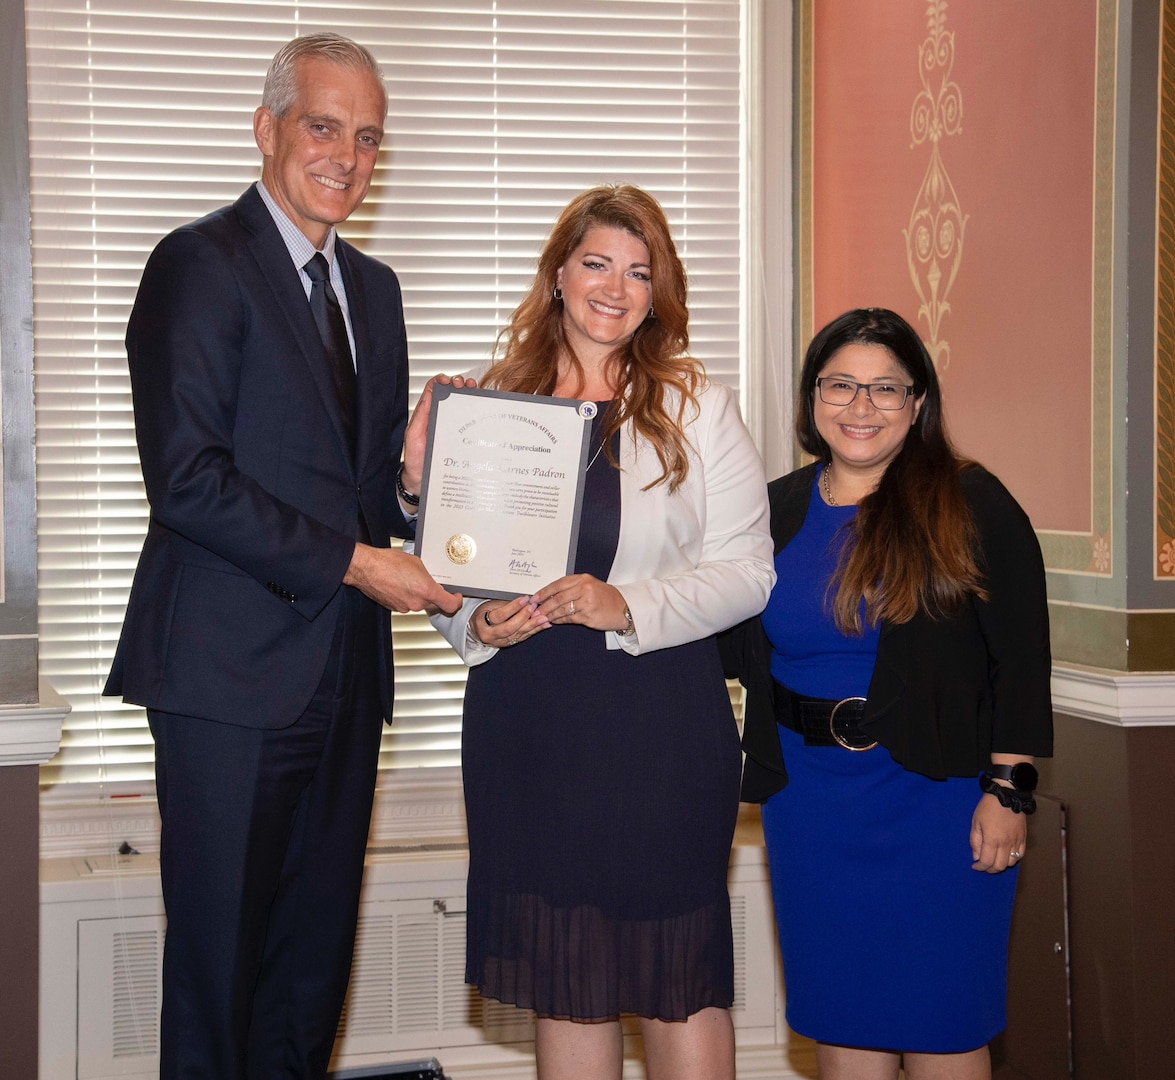 Landstuhl Regional Medical Center (LRMC) staff member Dr. Angela Karnes-Padron, a U.S. Air Force veteran, receives a certificate of appreciation at the Library of Congress, from the Secretary of Veterans Affairs, Denis McDonough, and Lourdes Tiglao, director of the CWV. Karnes-Pardon is one of 21 women selected by the Department of Veterans Affairs Center for Women Veterans (CWV) as a Women Veteran Trailblazers “Women Making the Difference.”